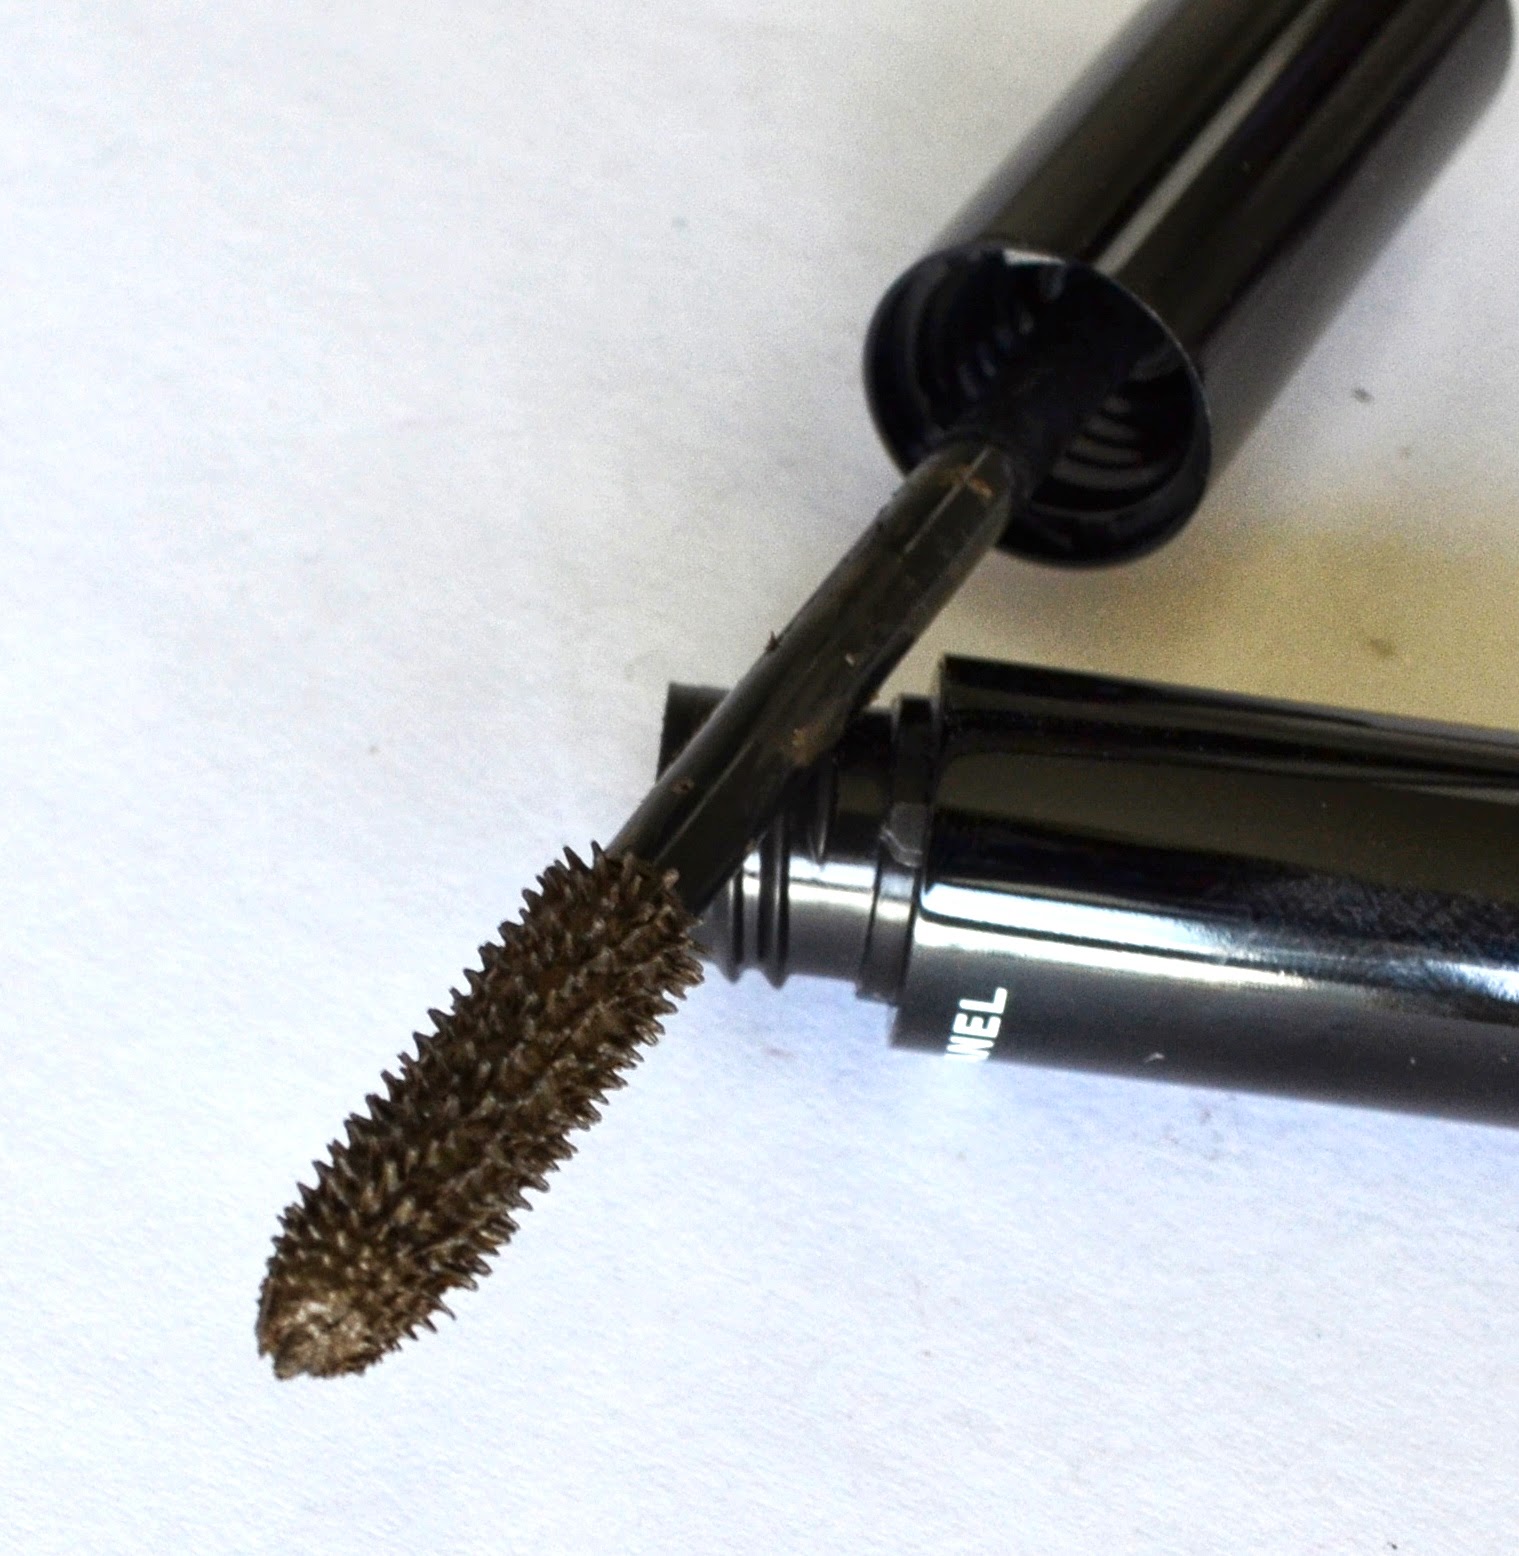 Chanel Le Volume Mascara in #40 Khaki Bronze from Fall 2013 Superstition  Collection